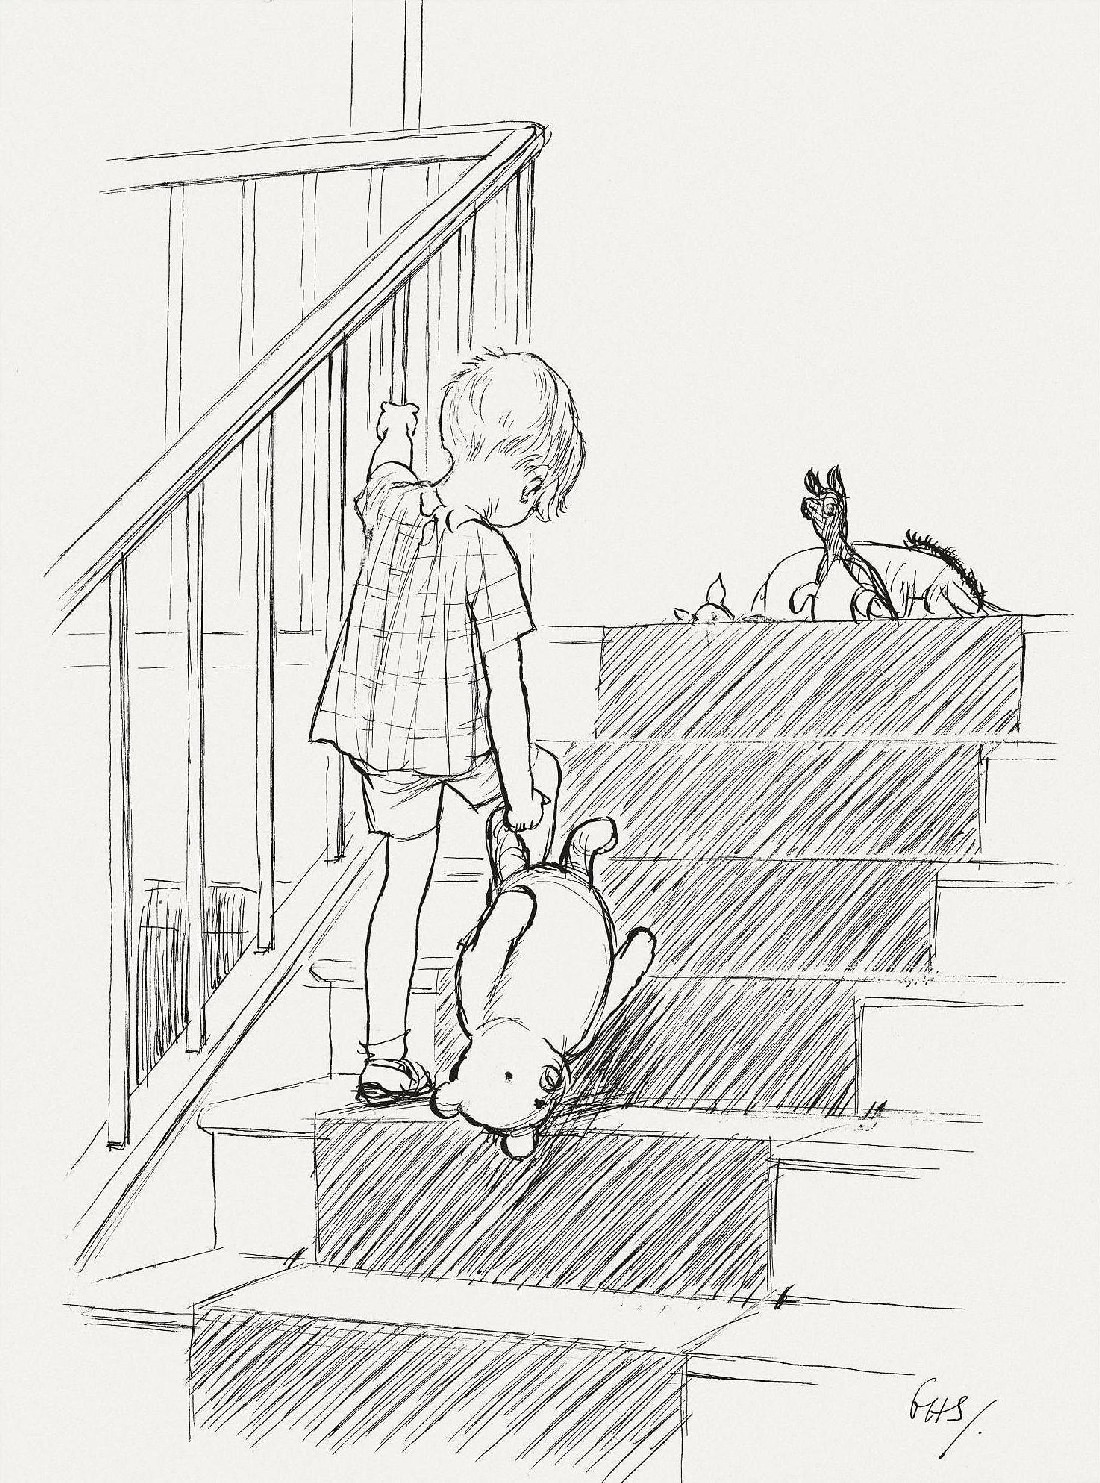 He nodded and went out …and in a moment I heard Winnie-the-Pooh bump, bump, bump – going up the stairs behind him.